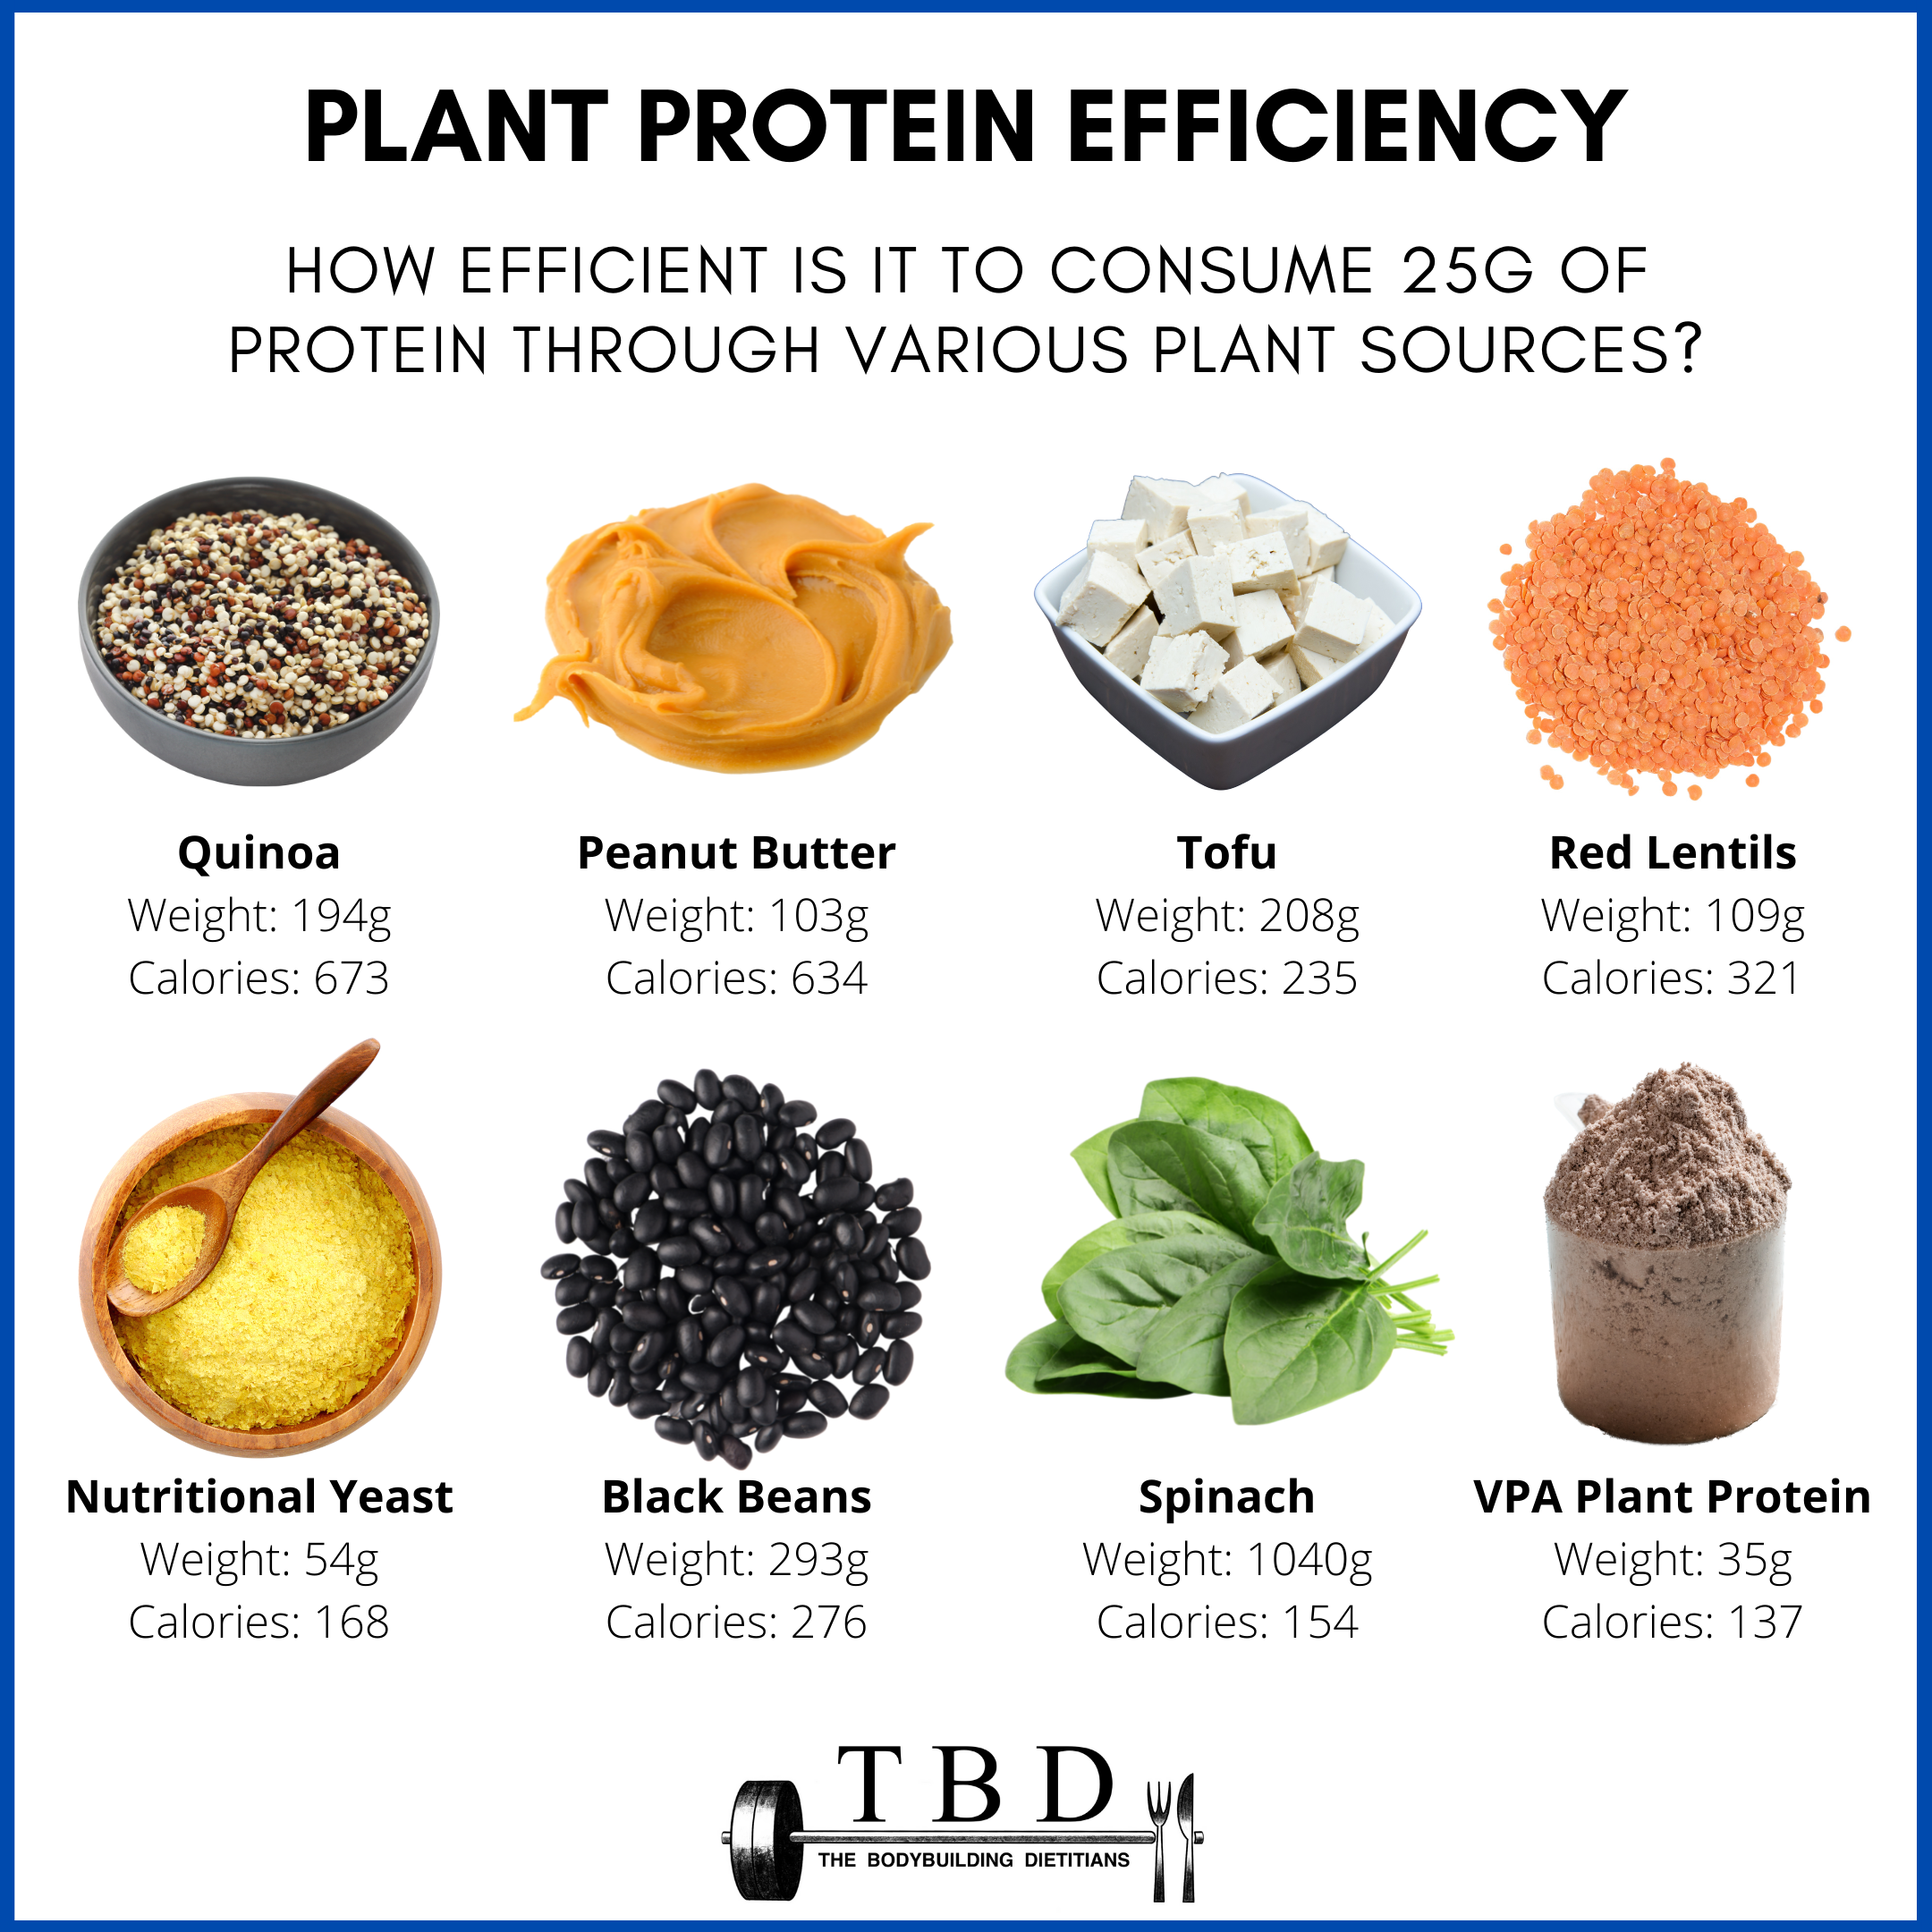 Vegan Protein Sources - How Are They? — Bodybuilding Dietitians